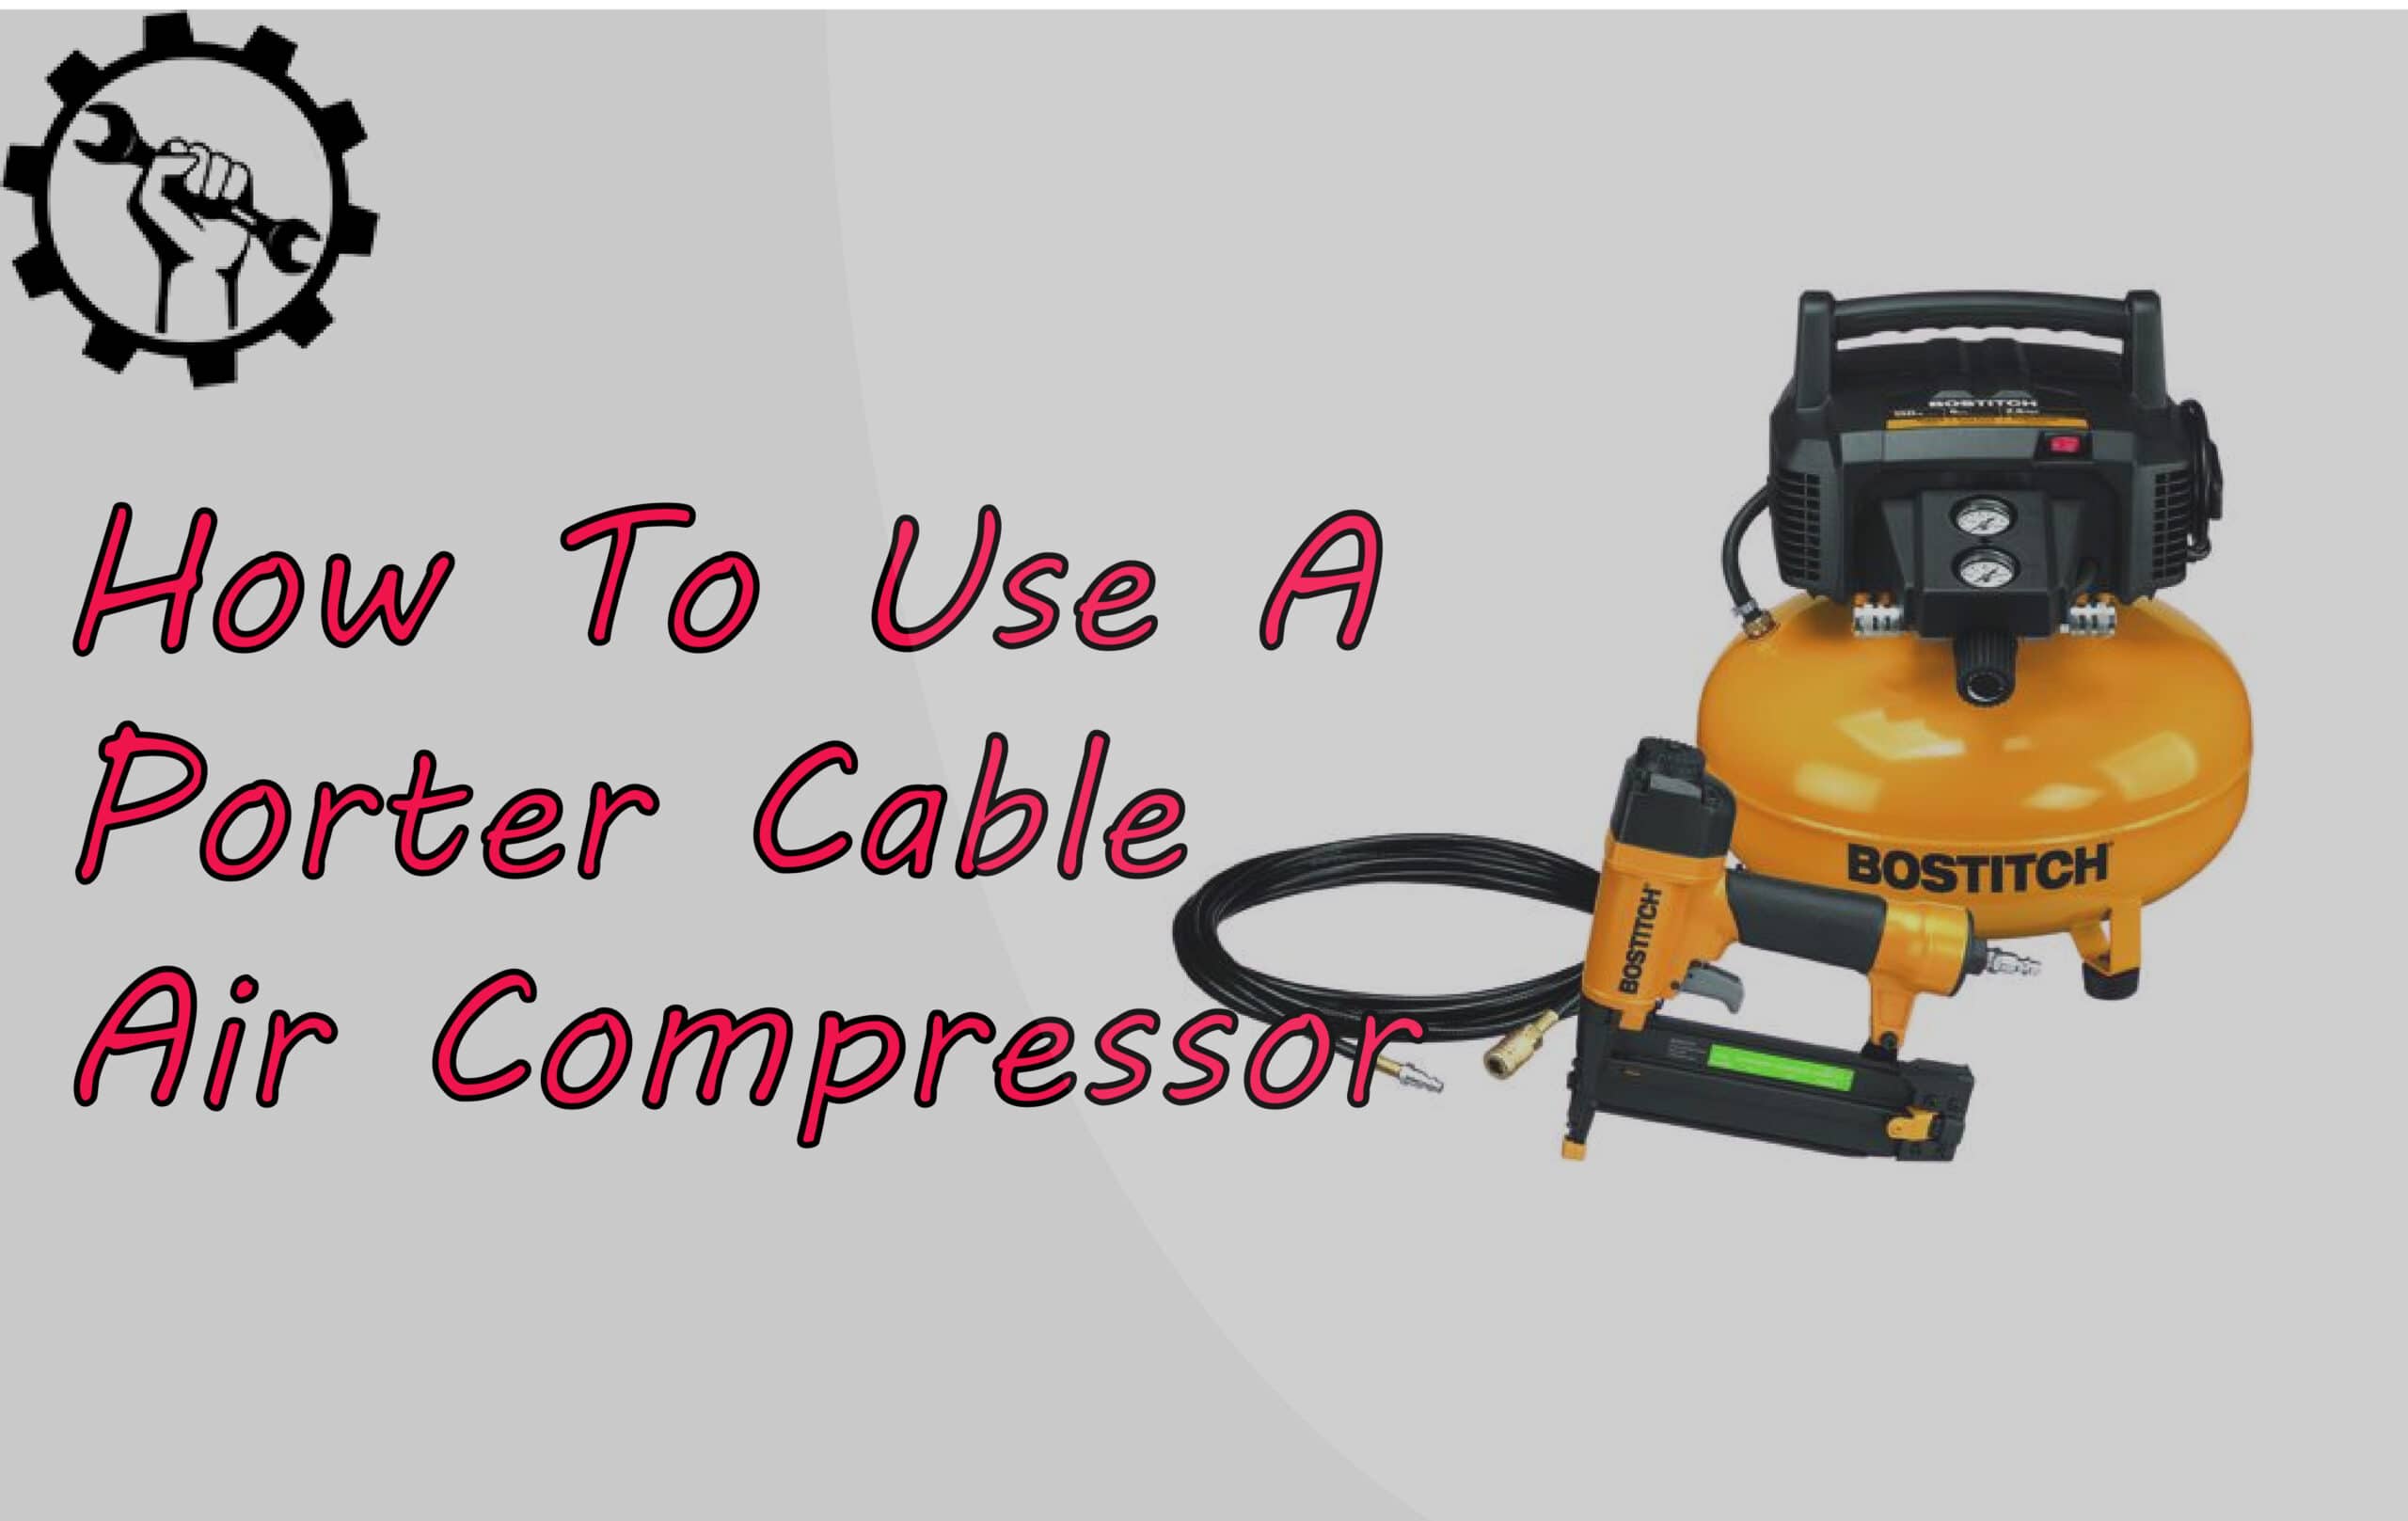 How To Use A Porter Cable Air Compressor